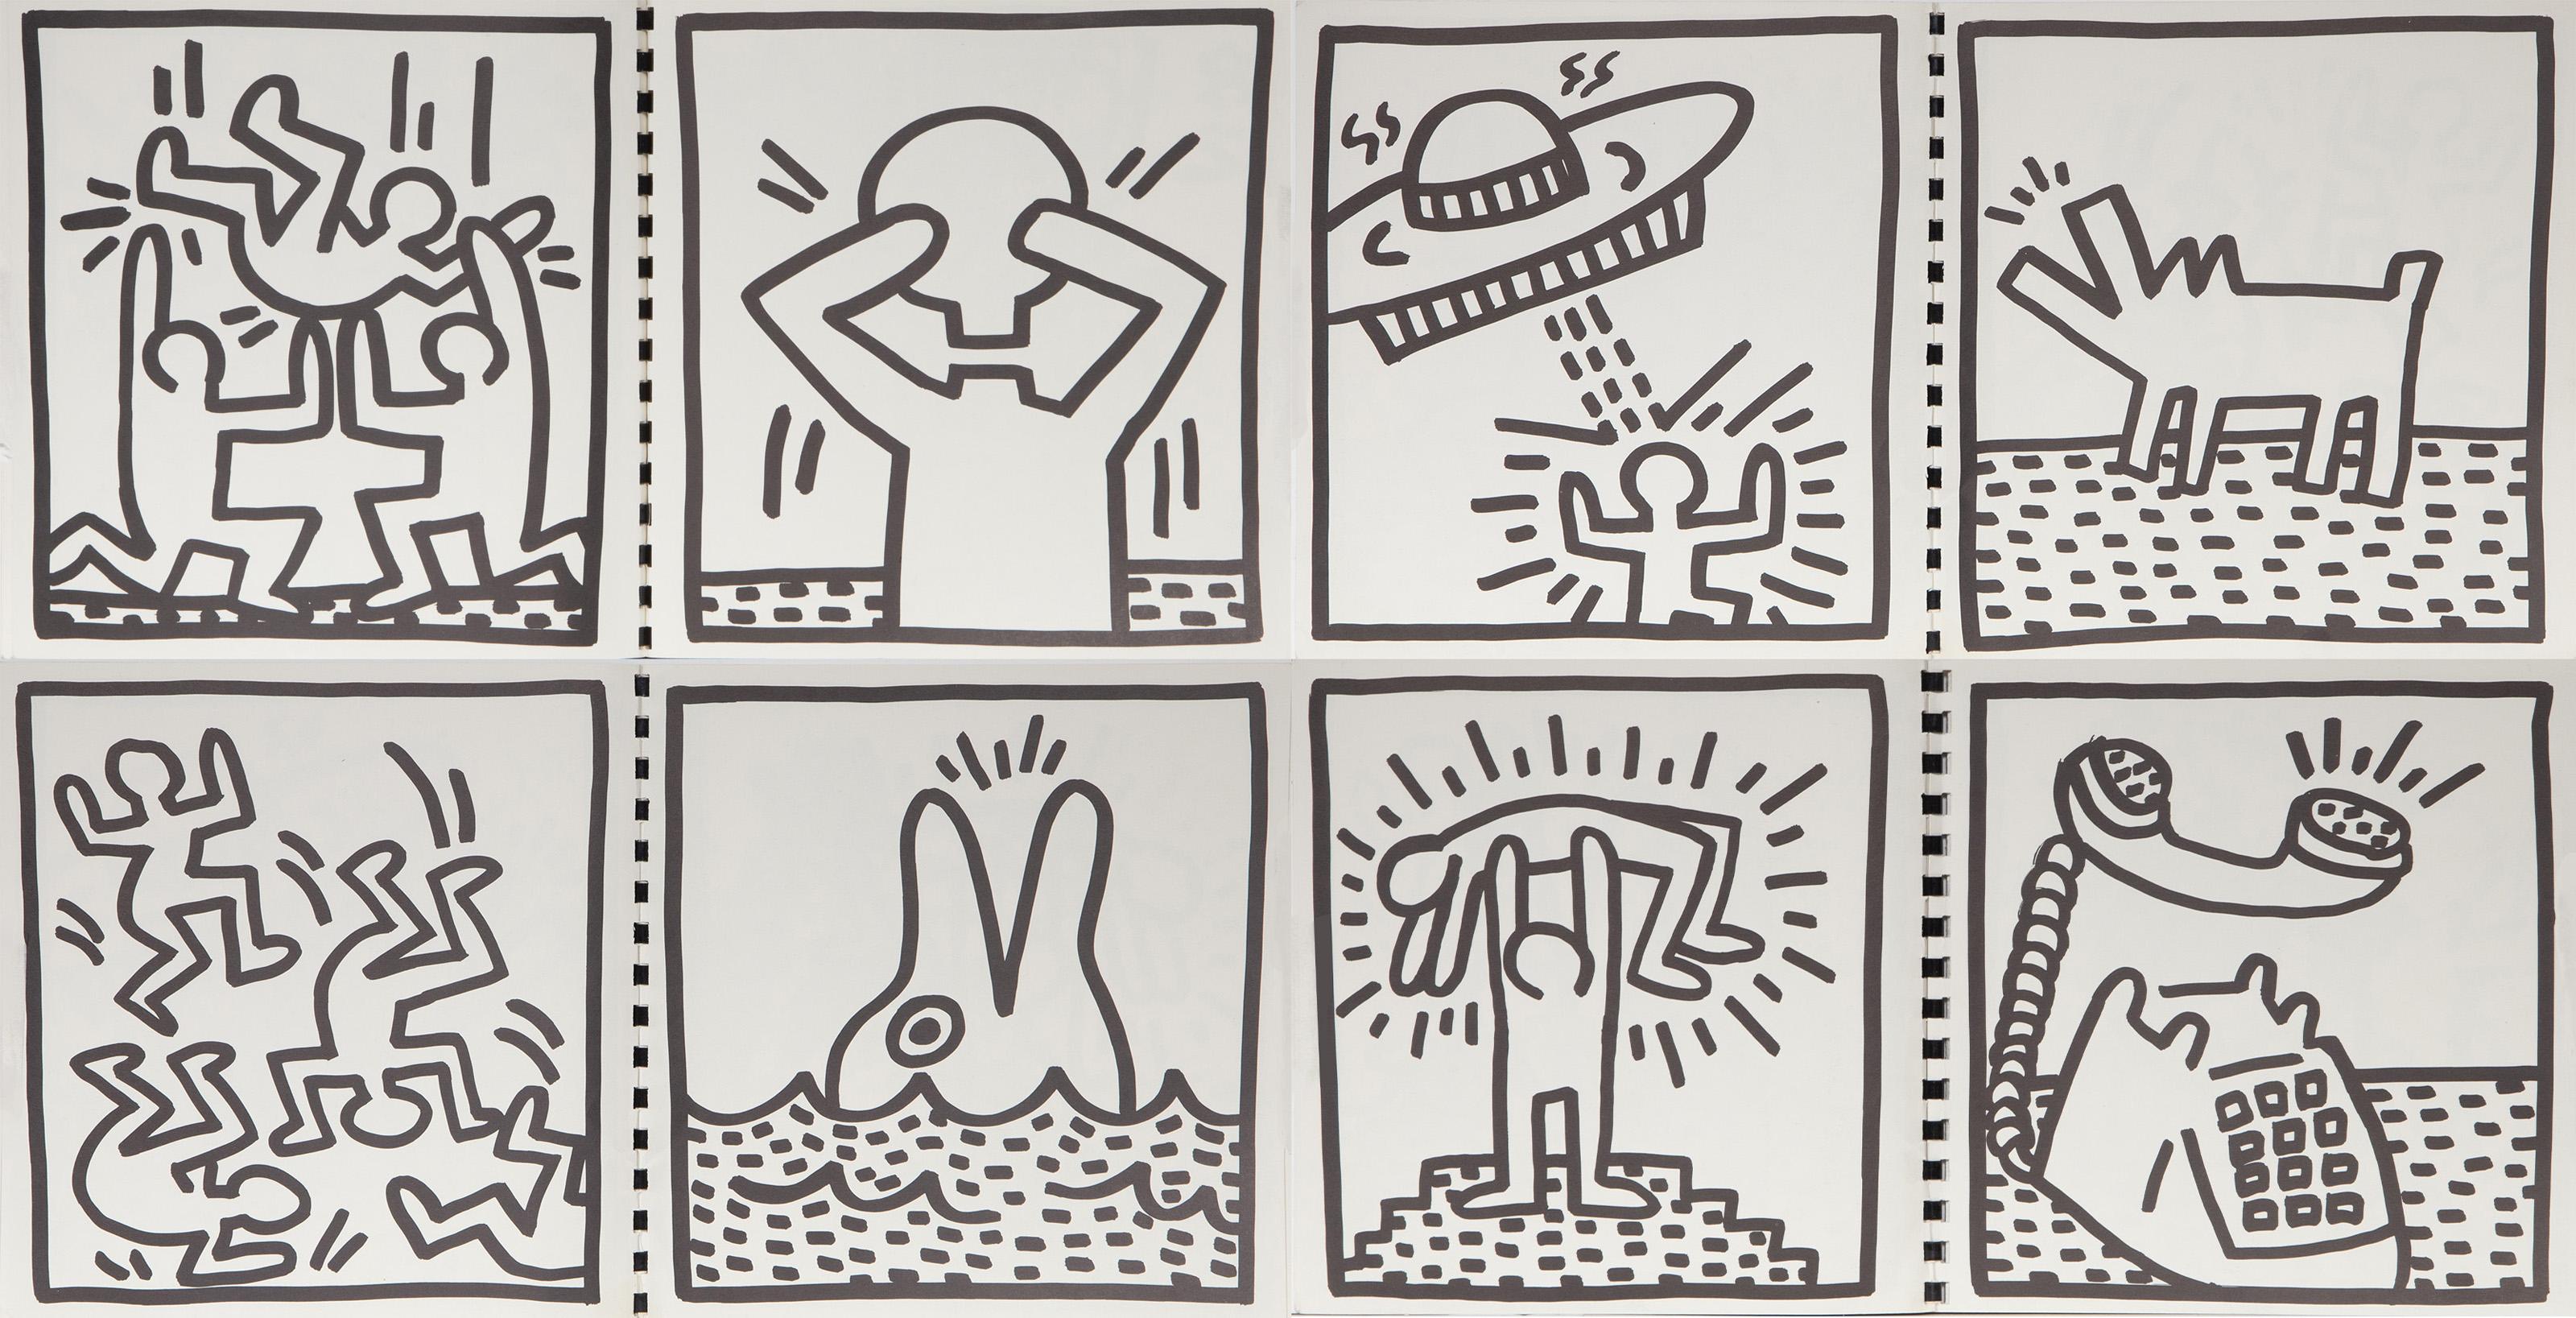 A blank coloring book designed and printed by American Pop artist Keith Haring. This collection is spiral bound and features several illustrations in the artist’s classic style.

Coloring Book
Keith Haring, American (1958–1990)
Date: 1982
30 Offset